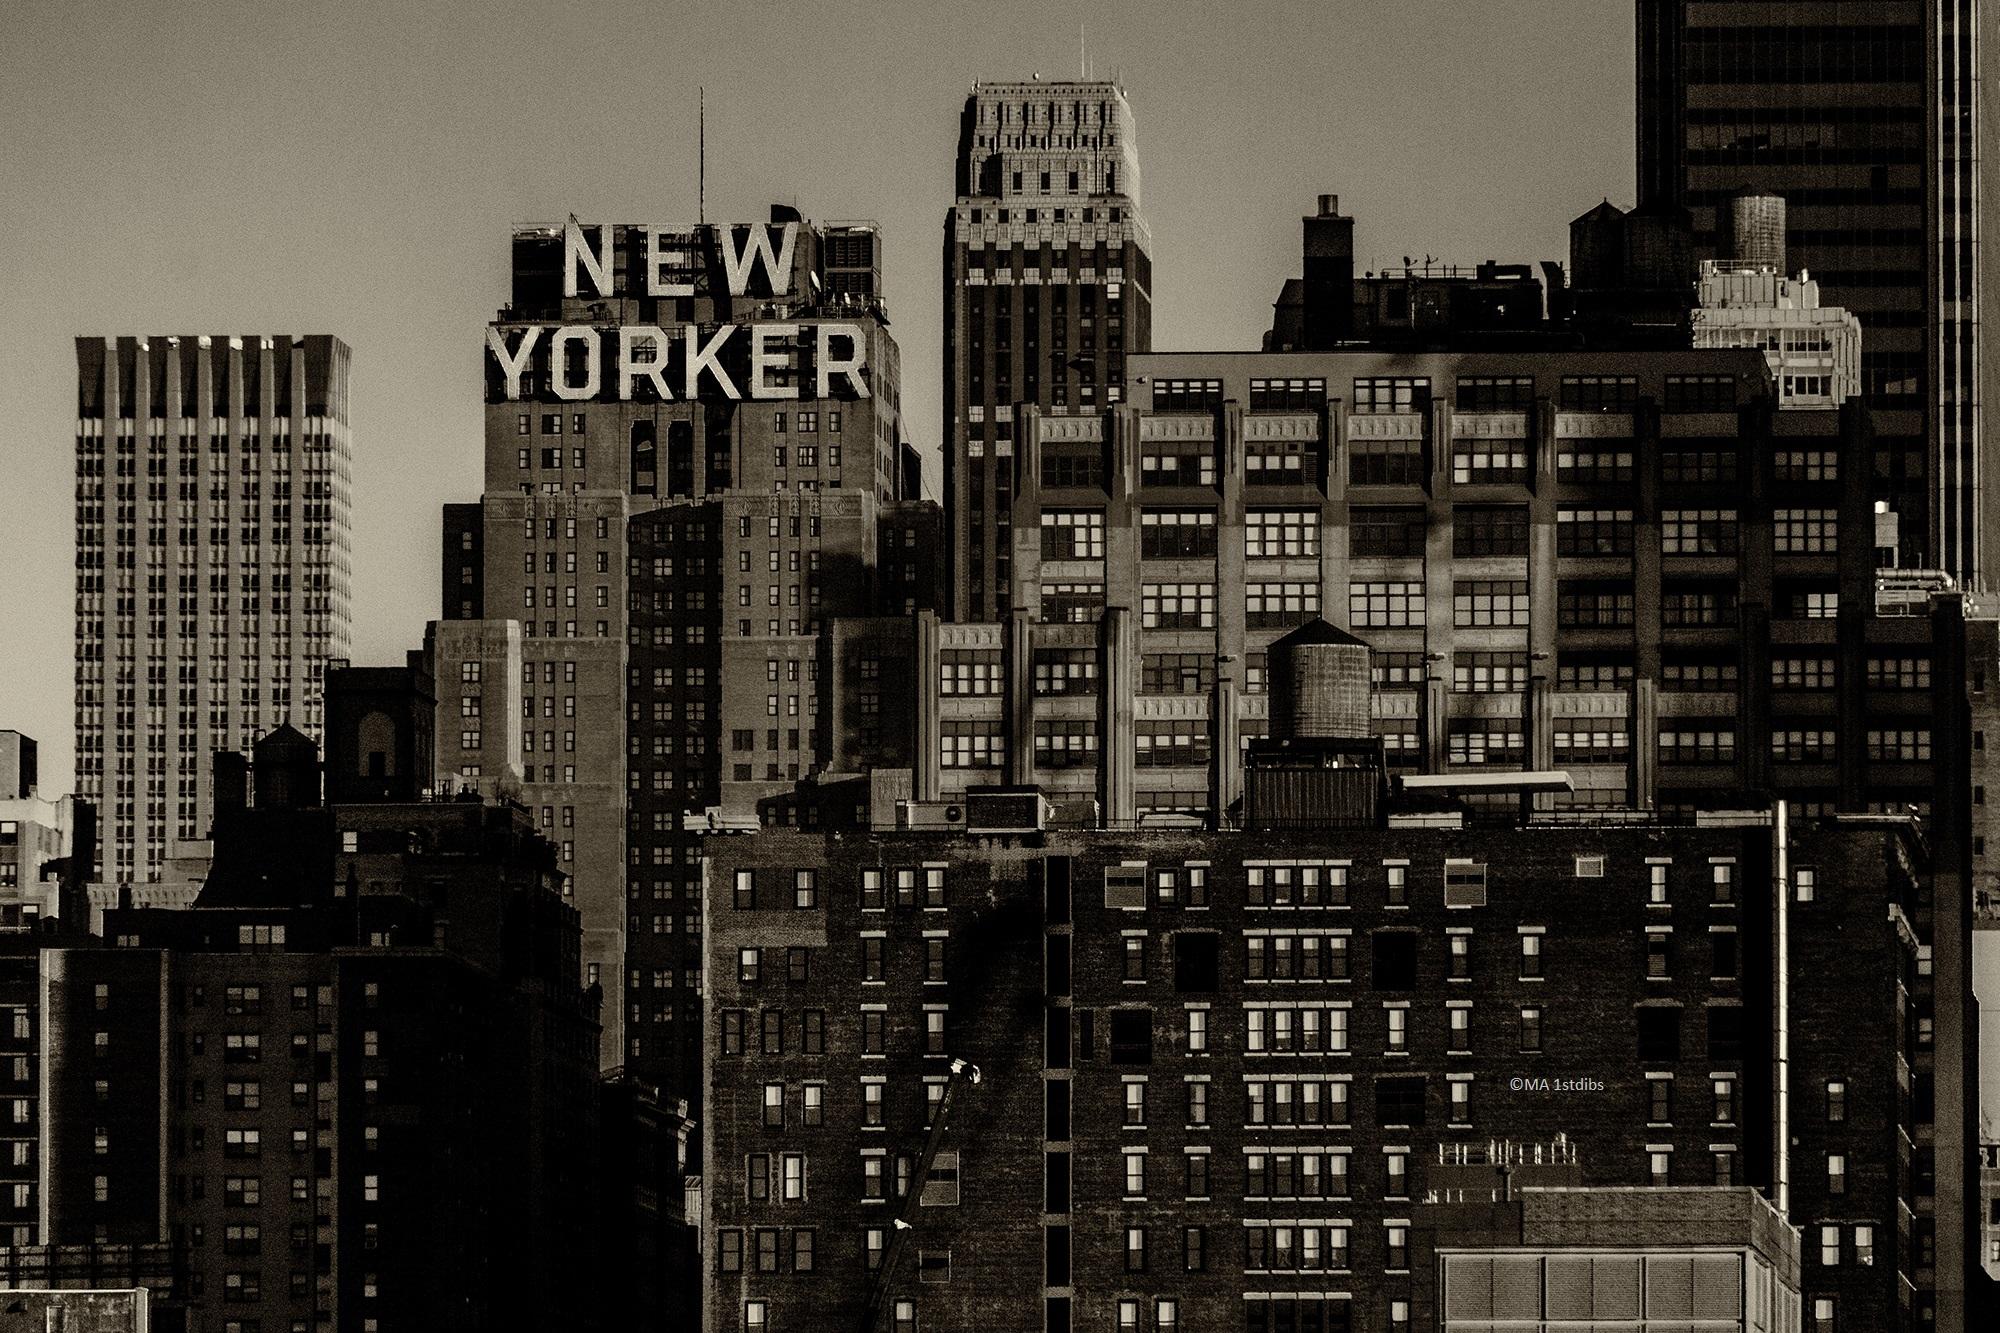 Alejandro Cerutti Black and White Photograph - New York City landscape photography - New Yorker - 30x45in. UV facemount